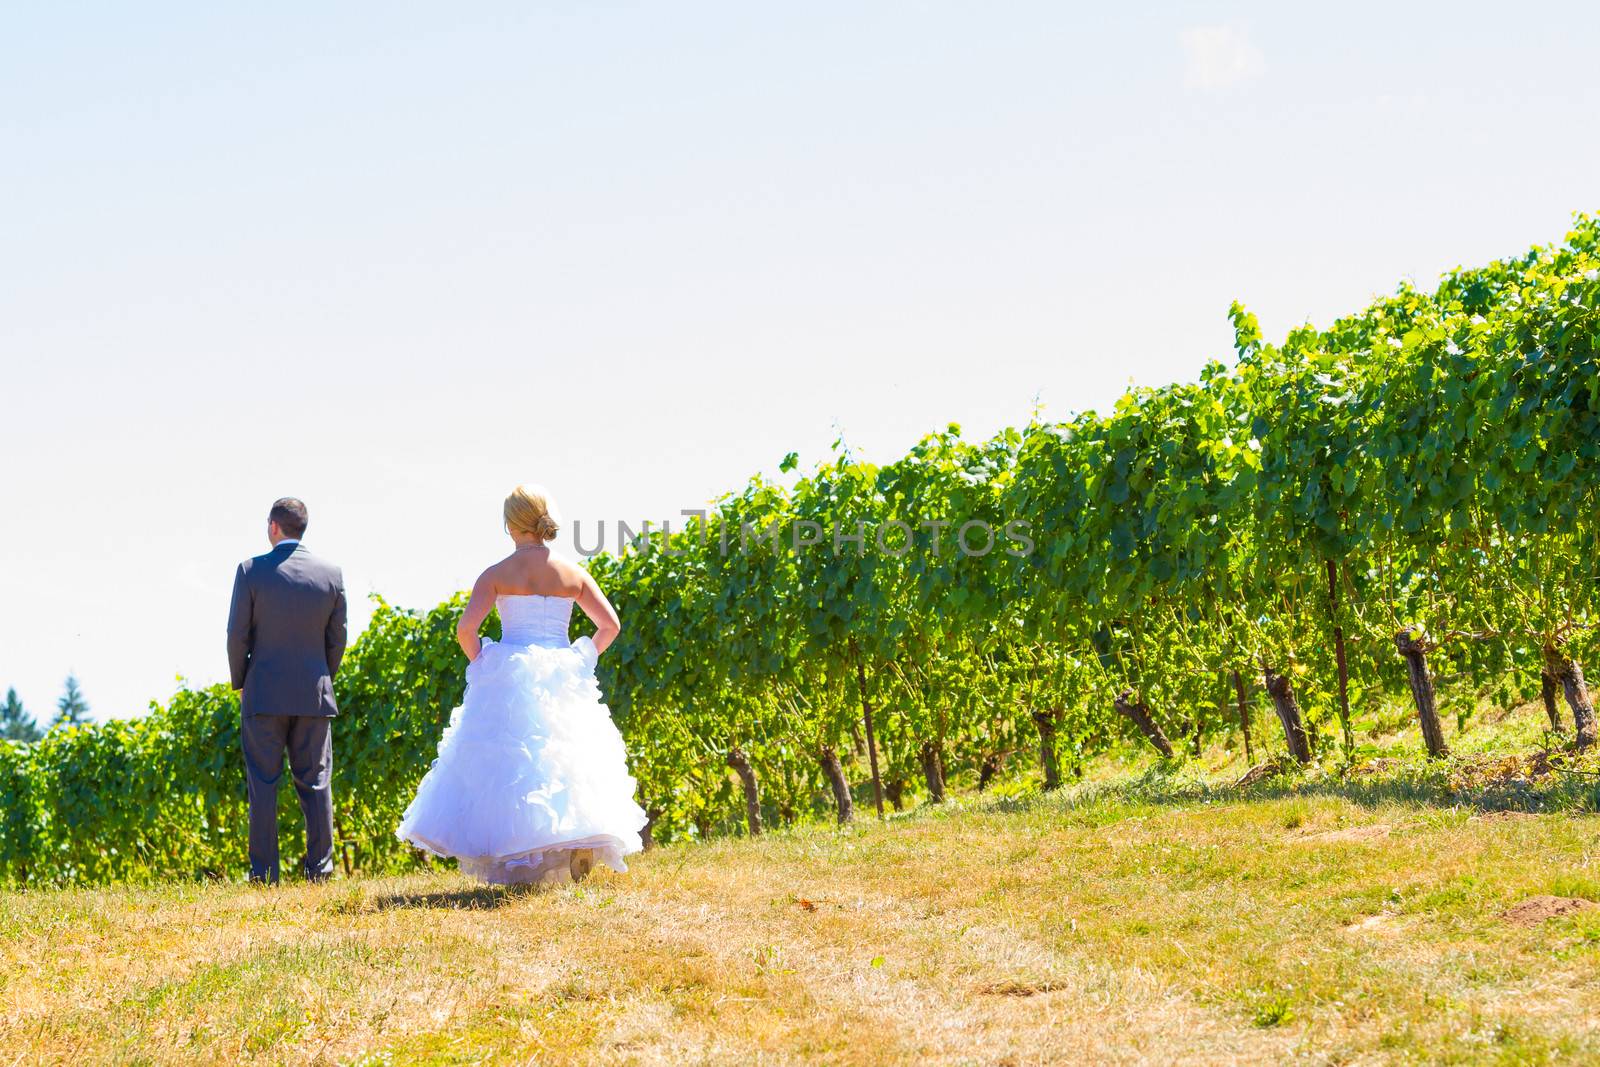 A man and woman share a first look moment as bride and groom outdoors at a winery vineyard in Oregon.